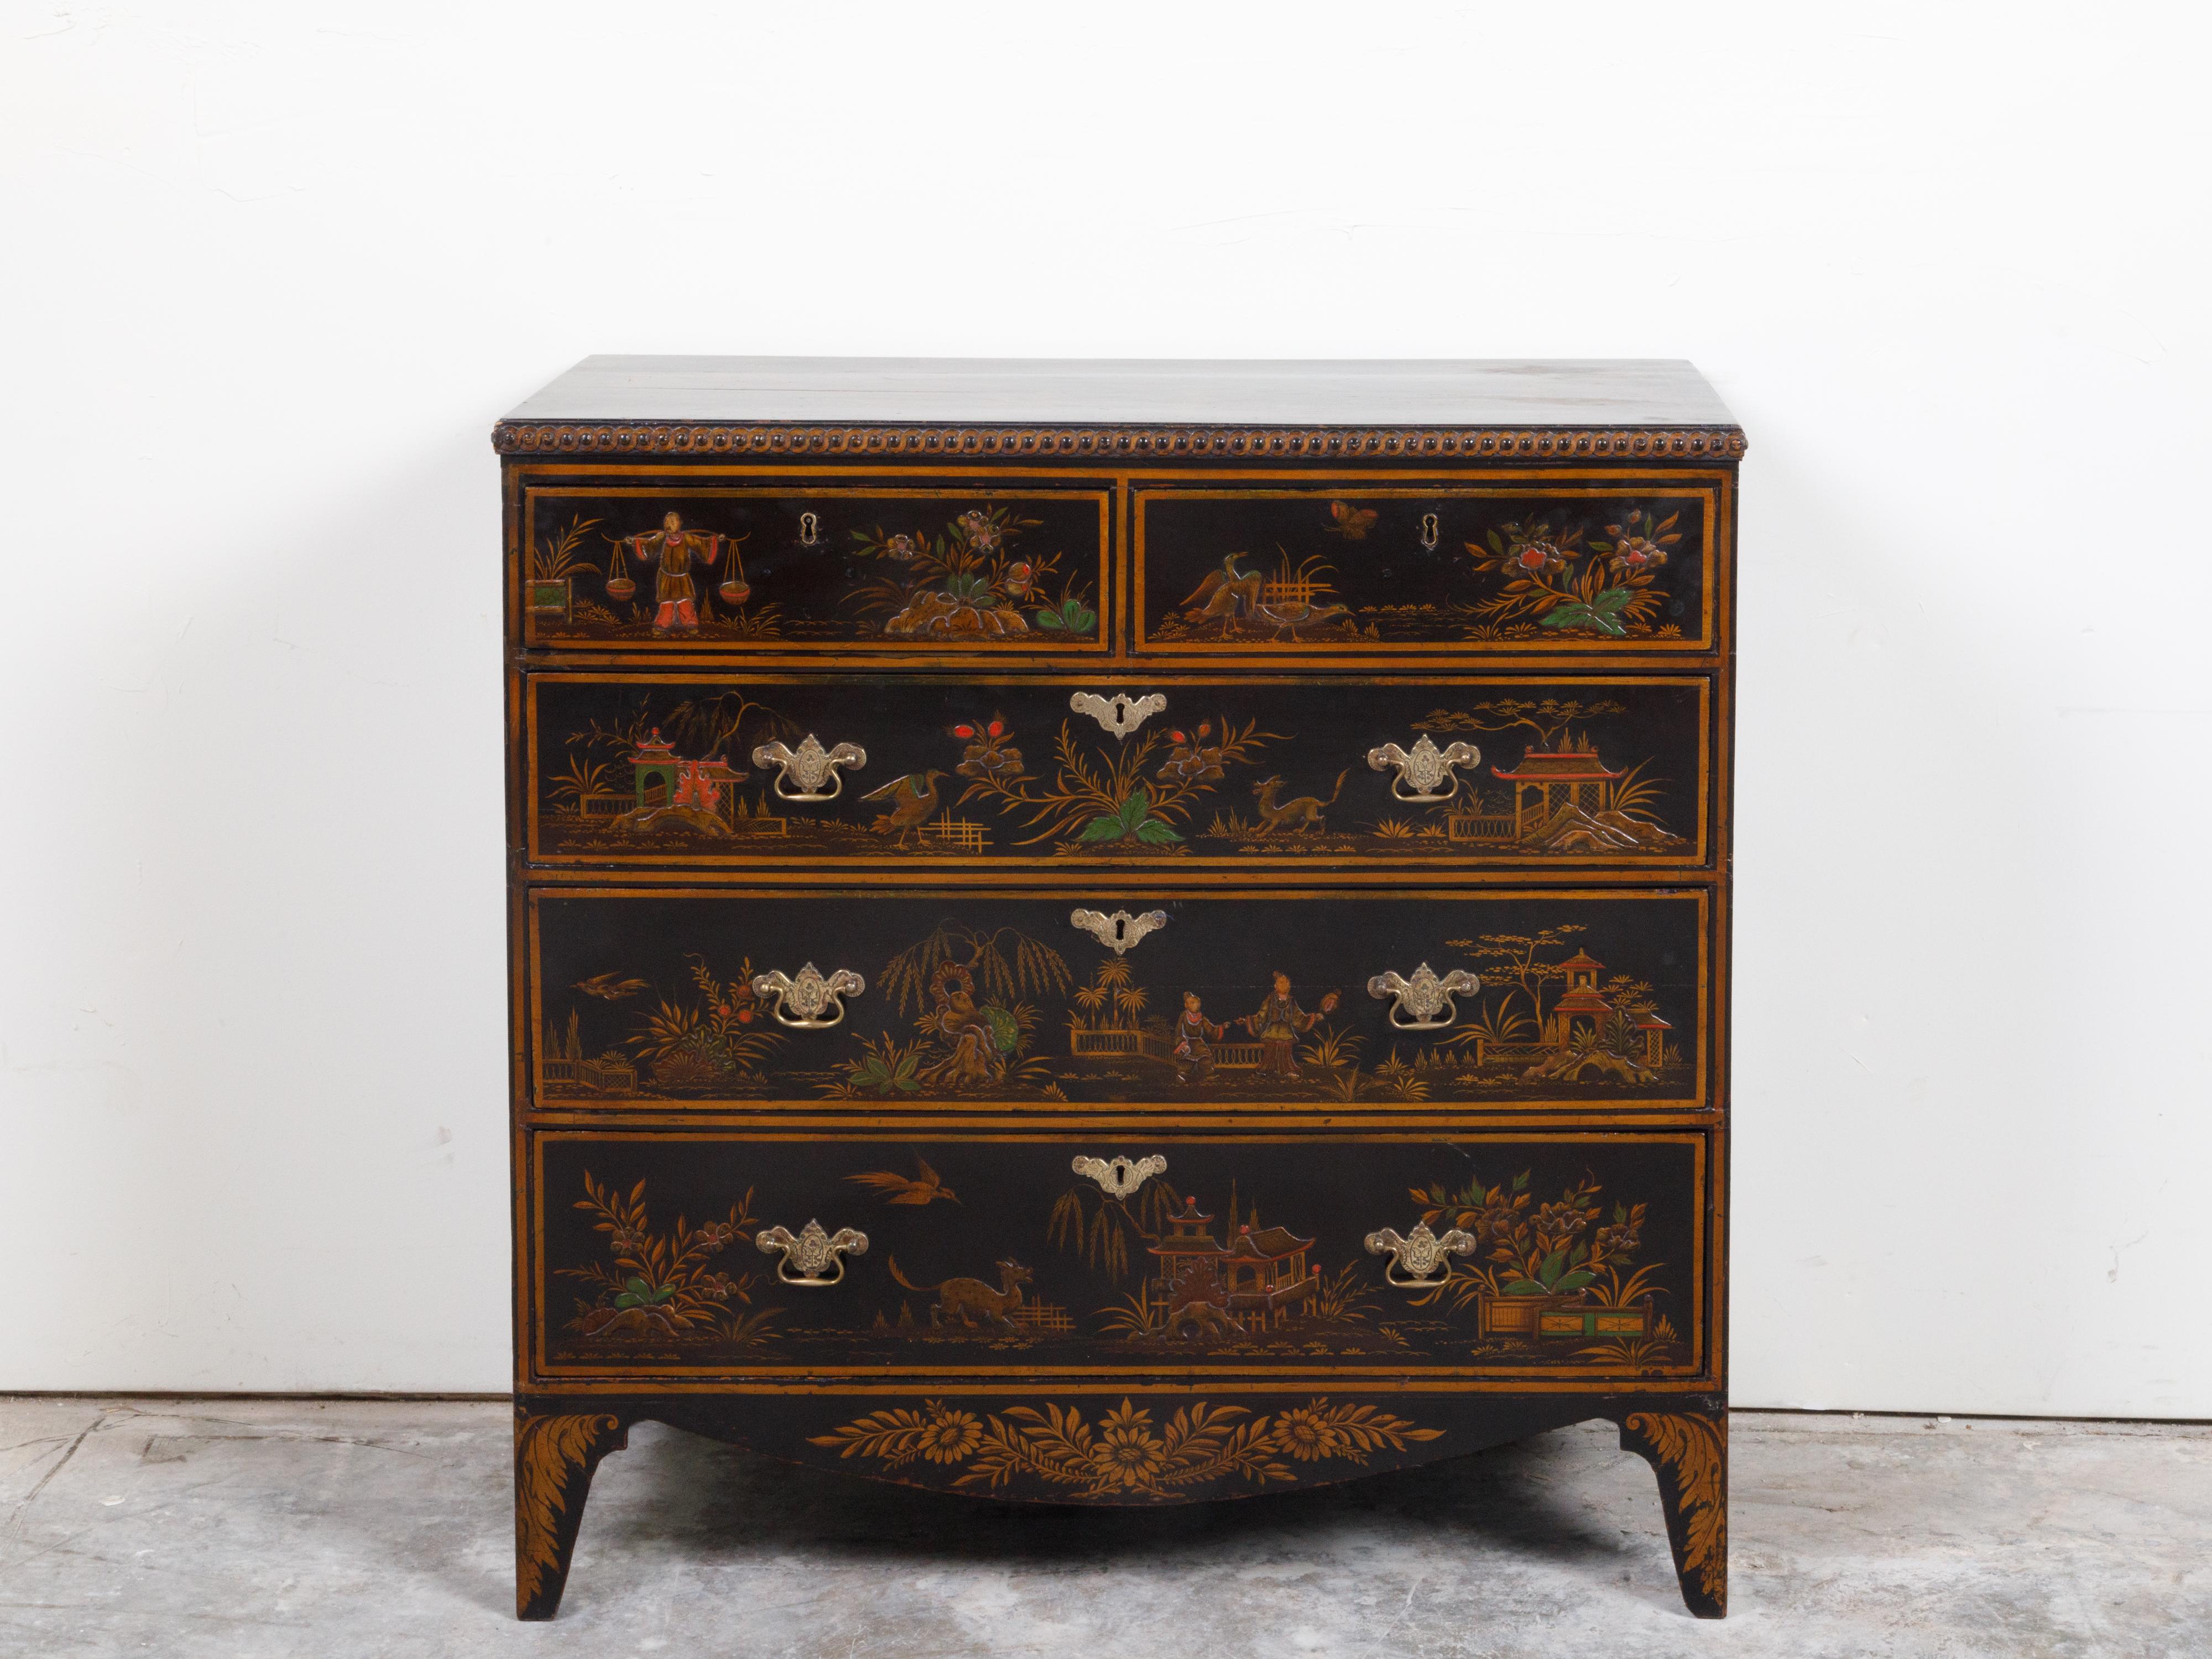 An English black commode from the 19th century, with Chinoiserie low-relief décor, guilloche motifs and five drawers. Created in England during the 19th century, this lacquered commode features a rectangular top with Chinoiserie décor, accented with